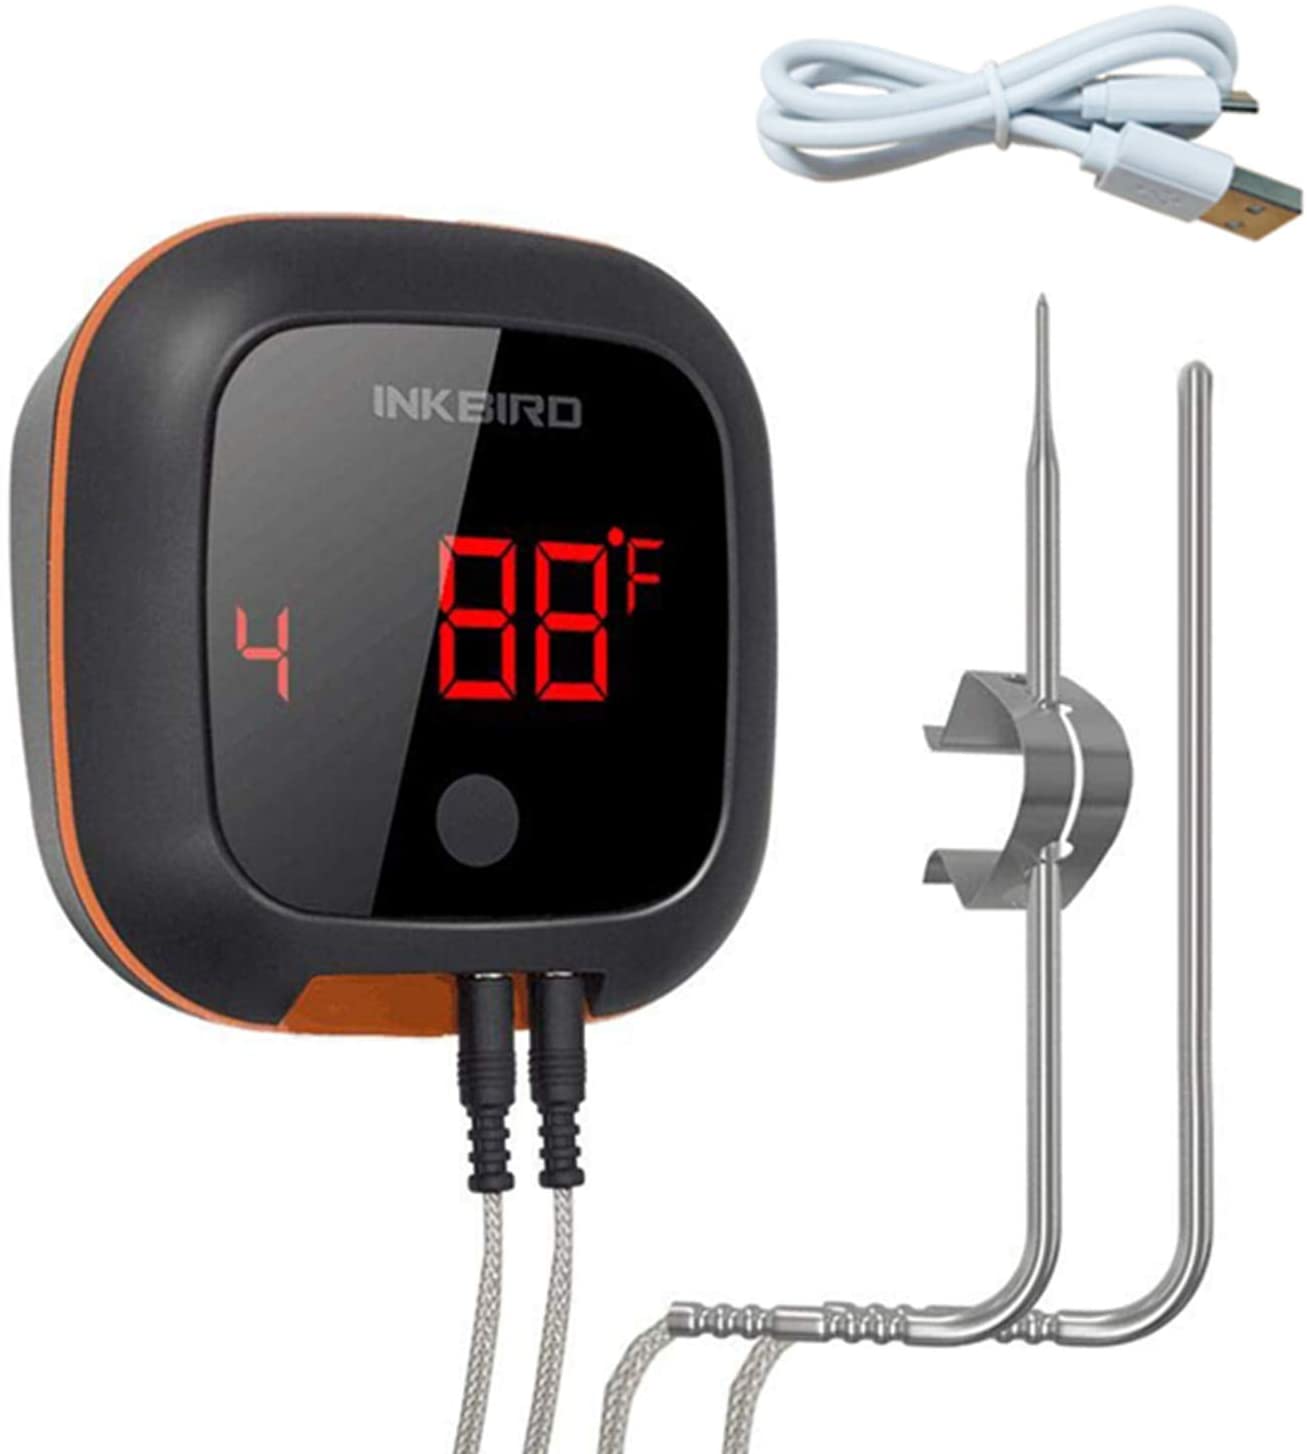 Best Dual Probe Barbecue Smoker Thermometer: Inkbird IBT-4XS